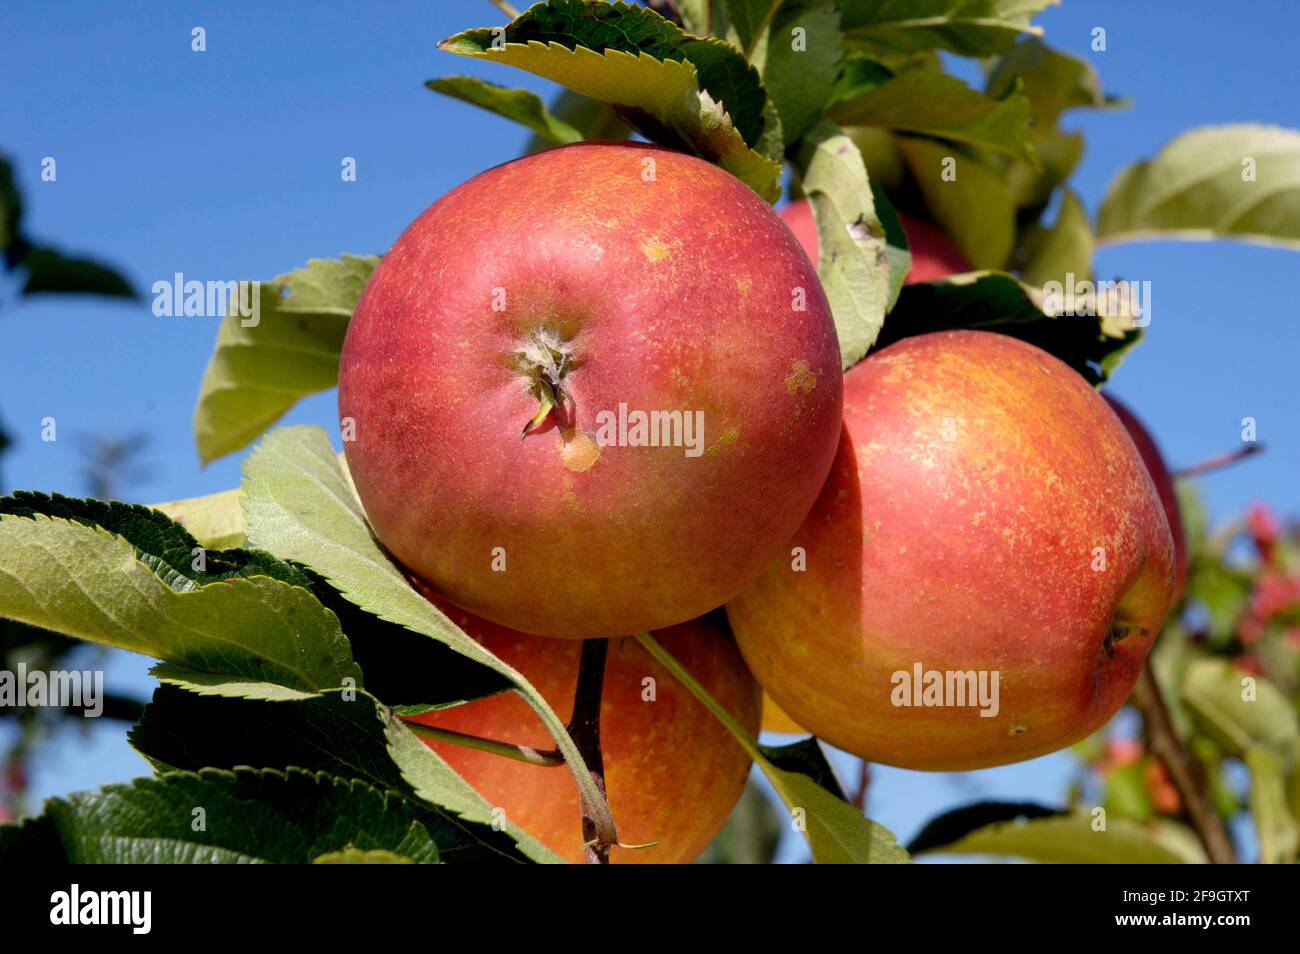 Apples on the tree Red Rubinette, Apple Stock Photo